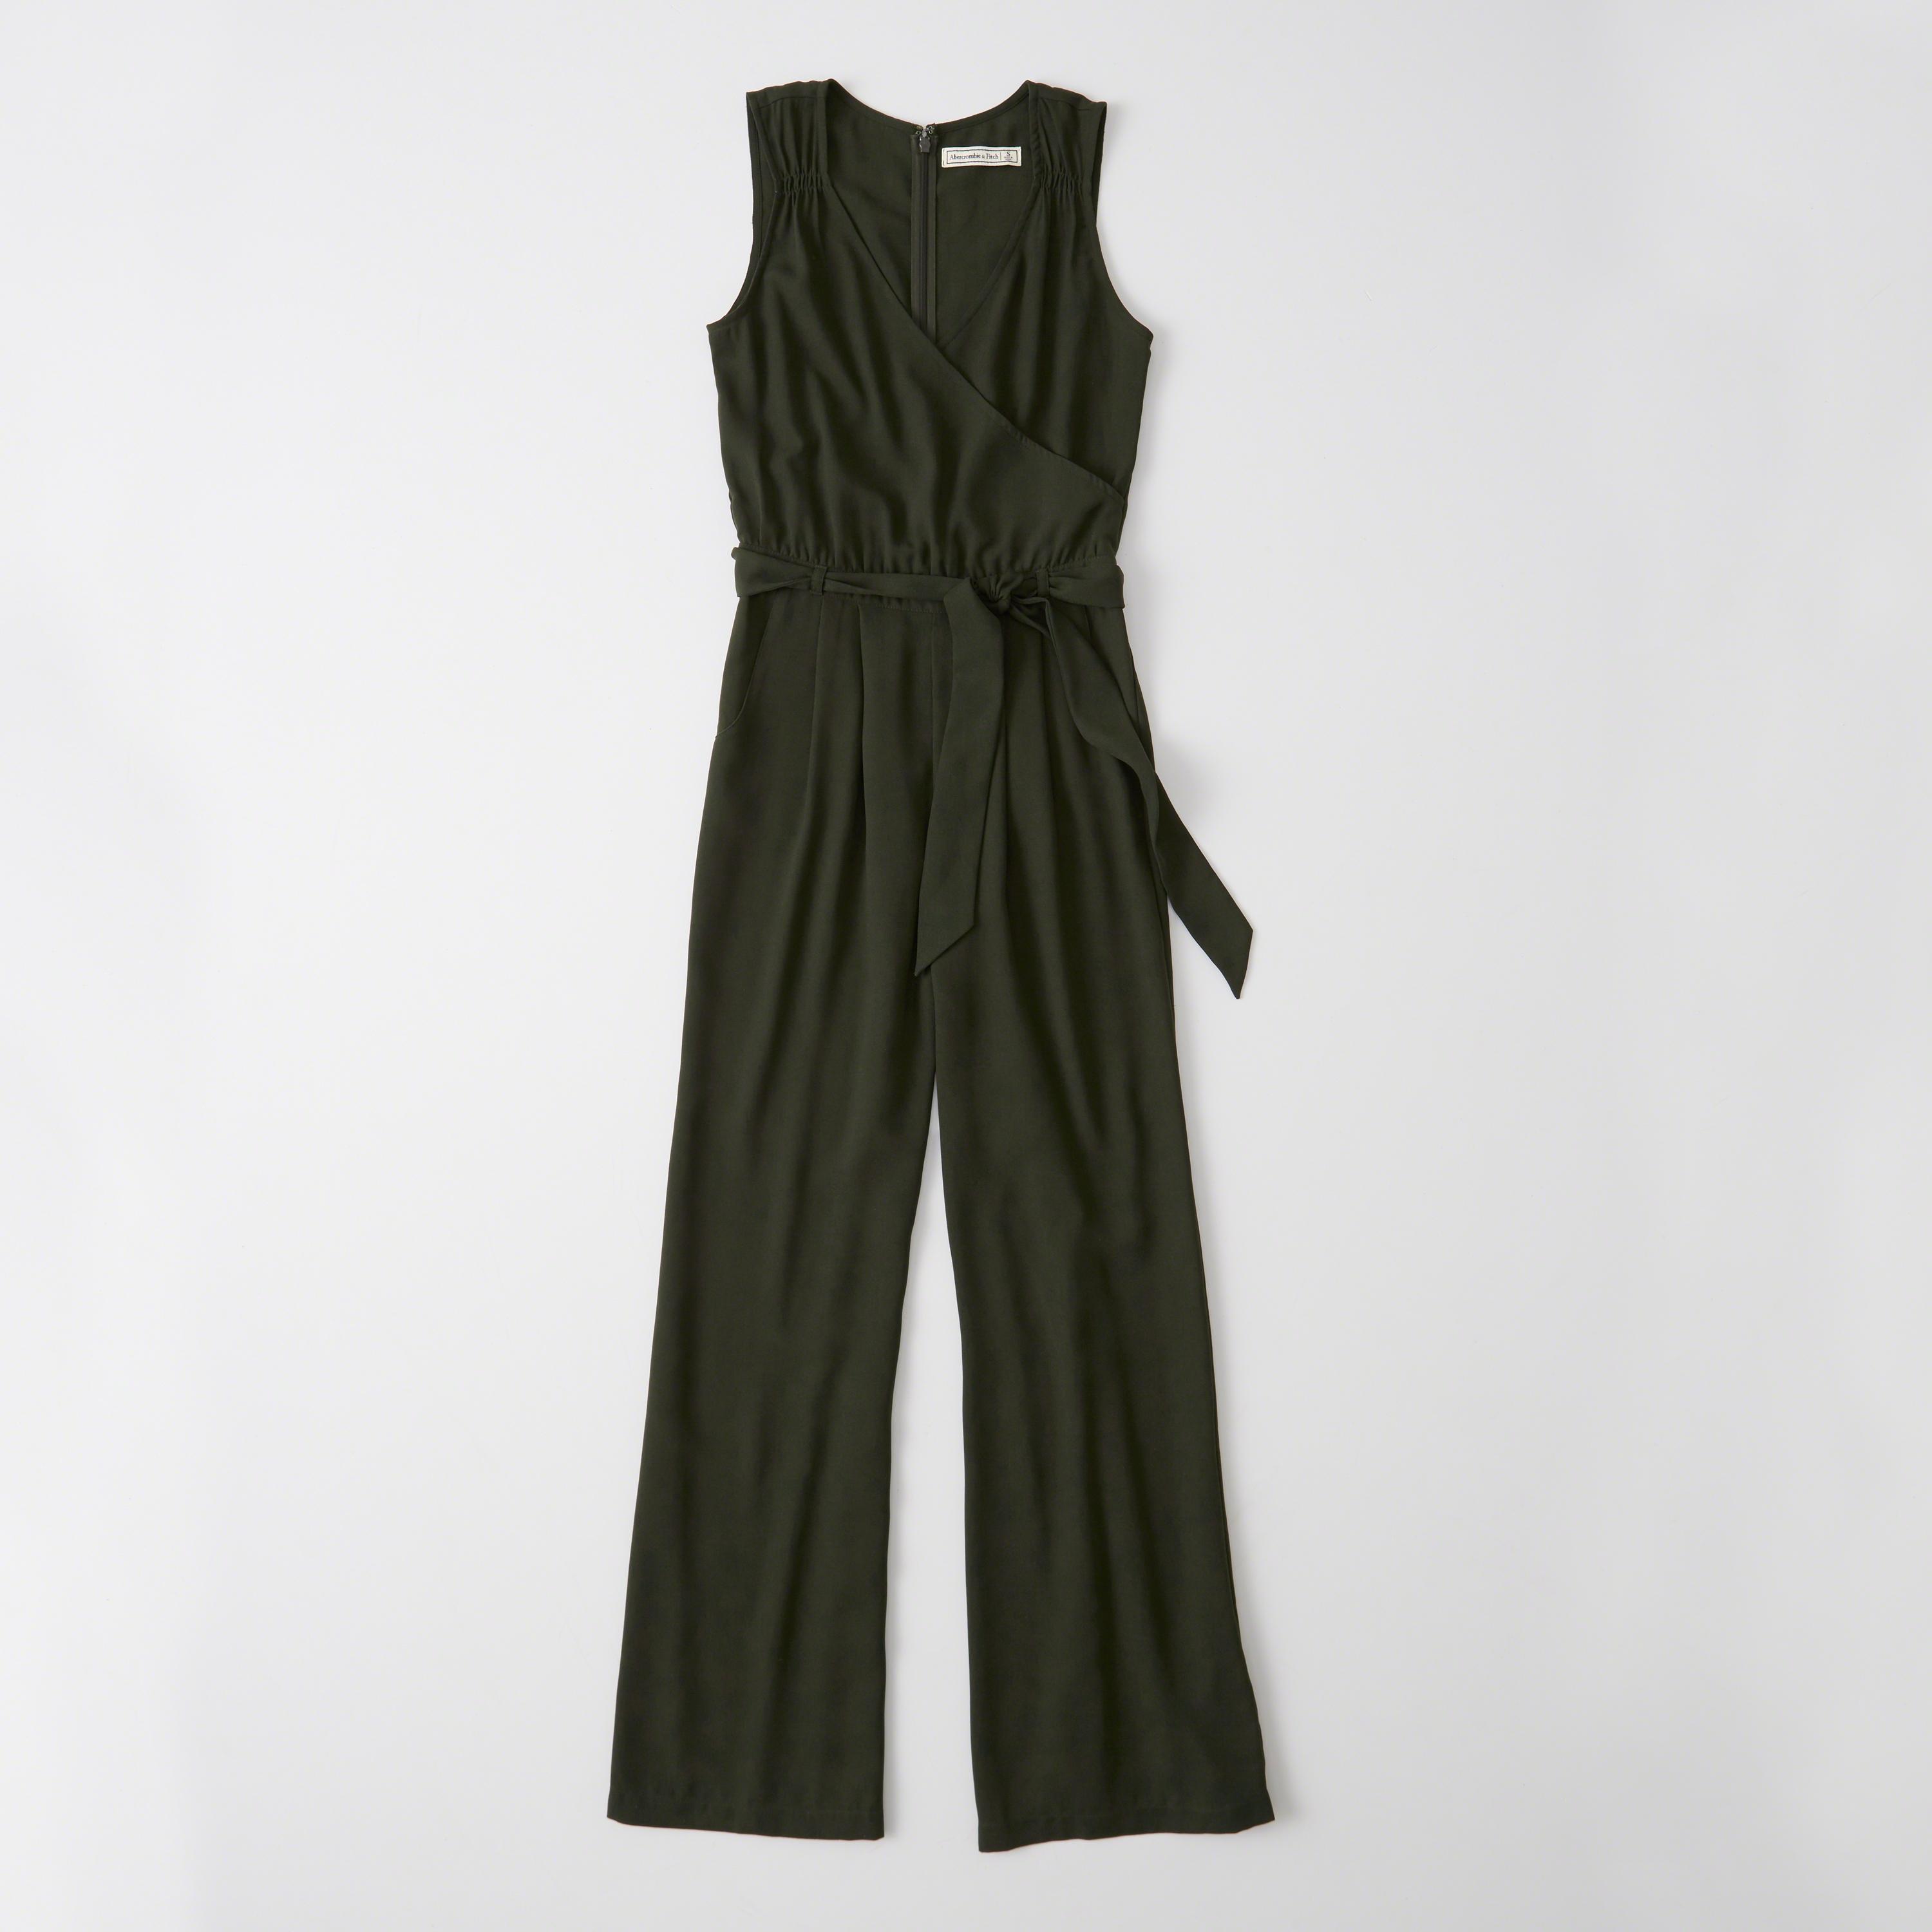 Lyst - Abercrombie & Fitch Wrap Jumpsuit in Green